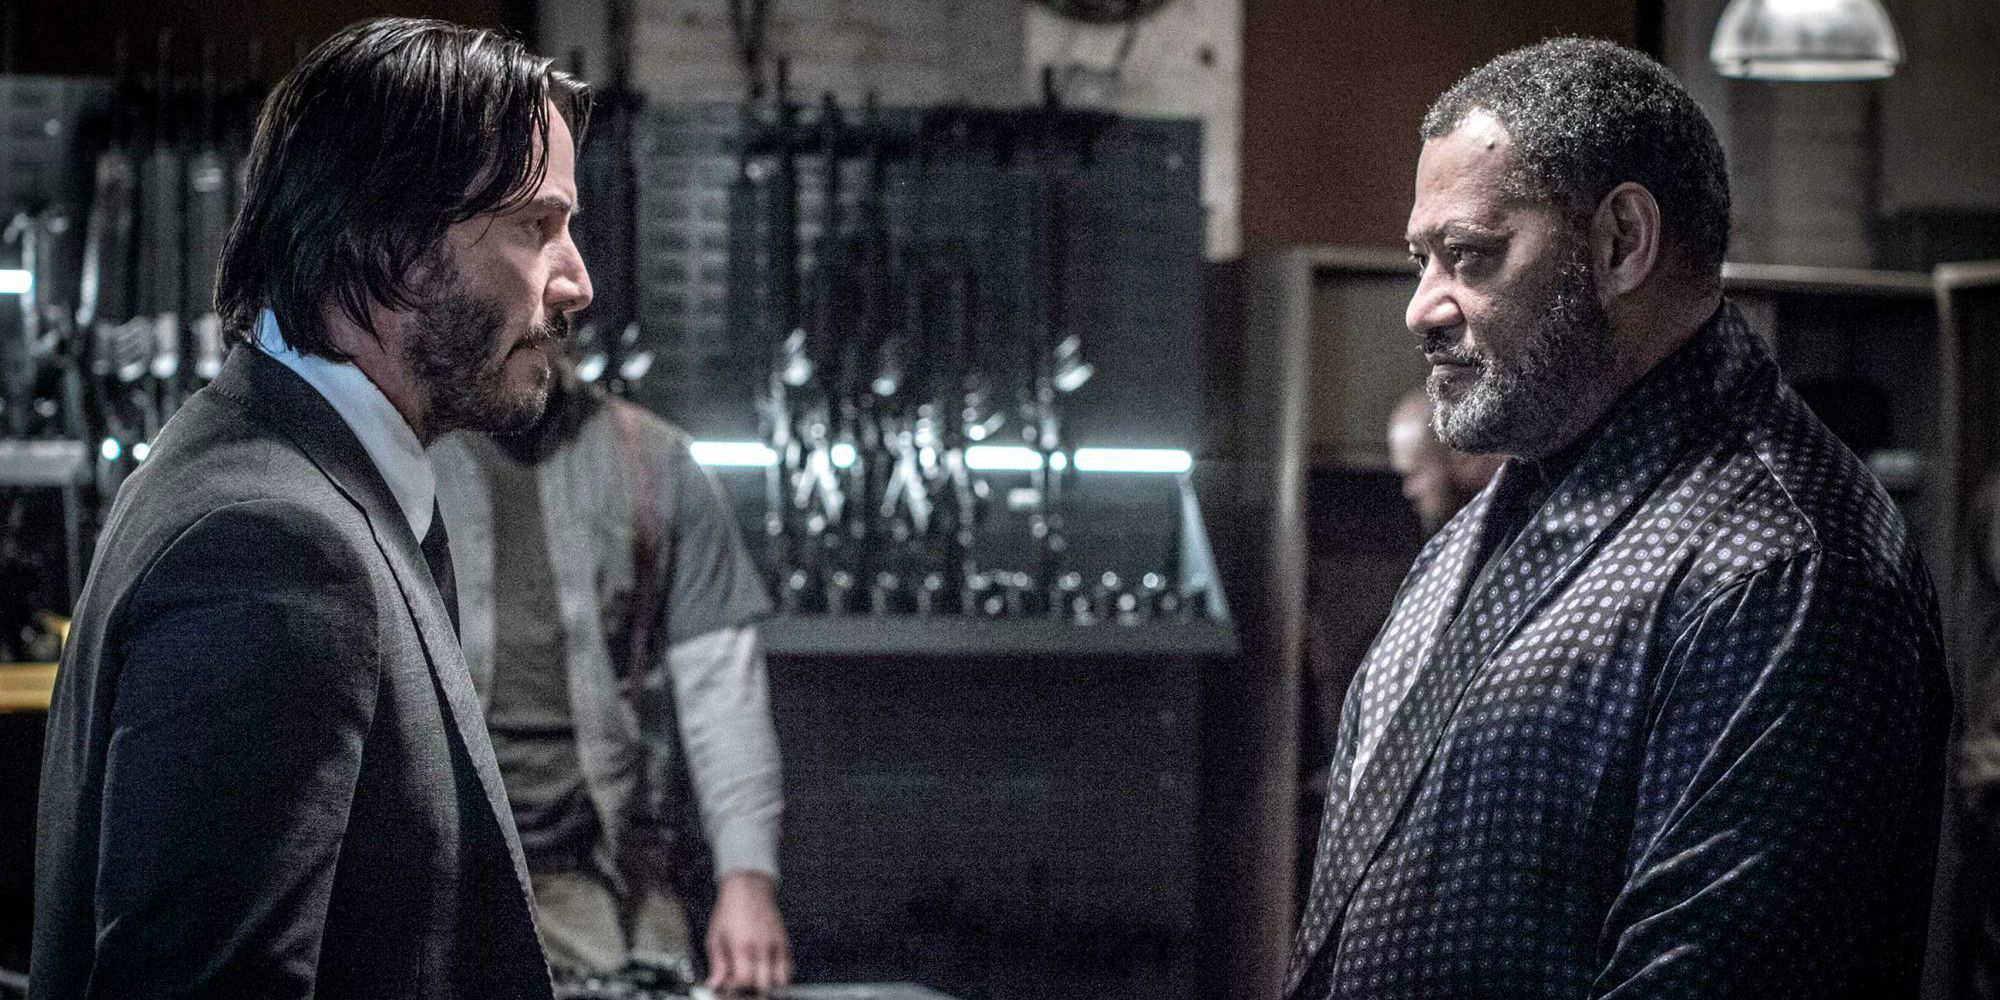 Keanu Reeves and Lawrence Fishburne in John Wick 2 banner